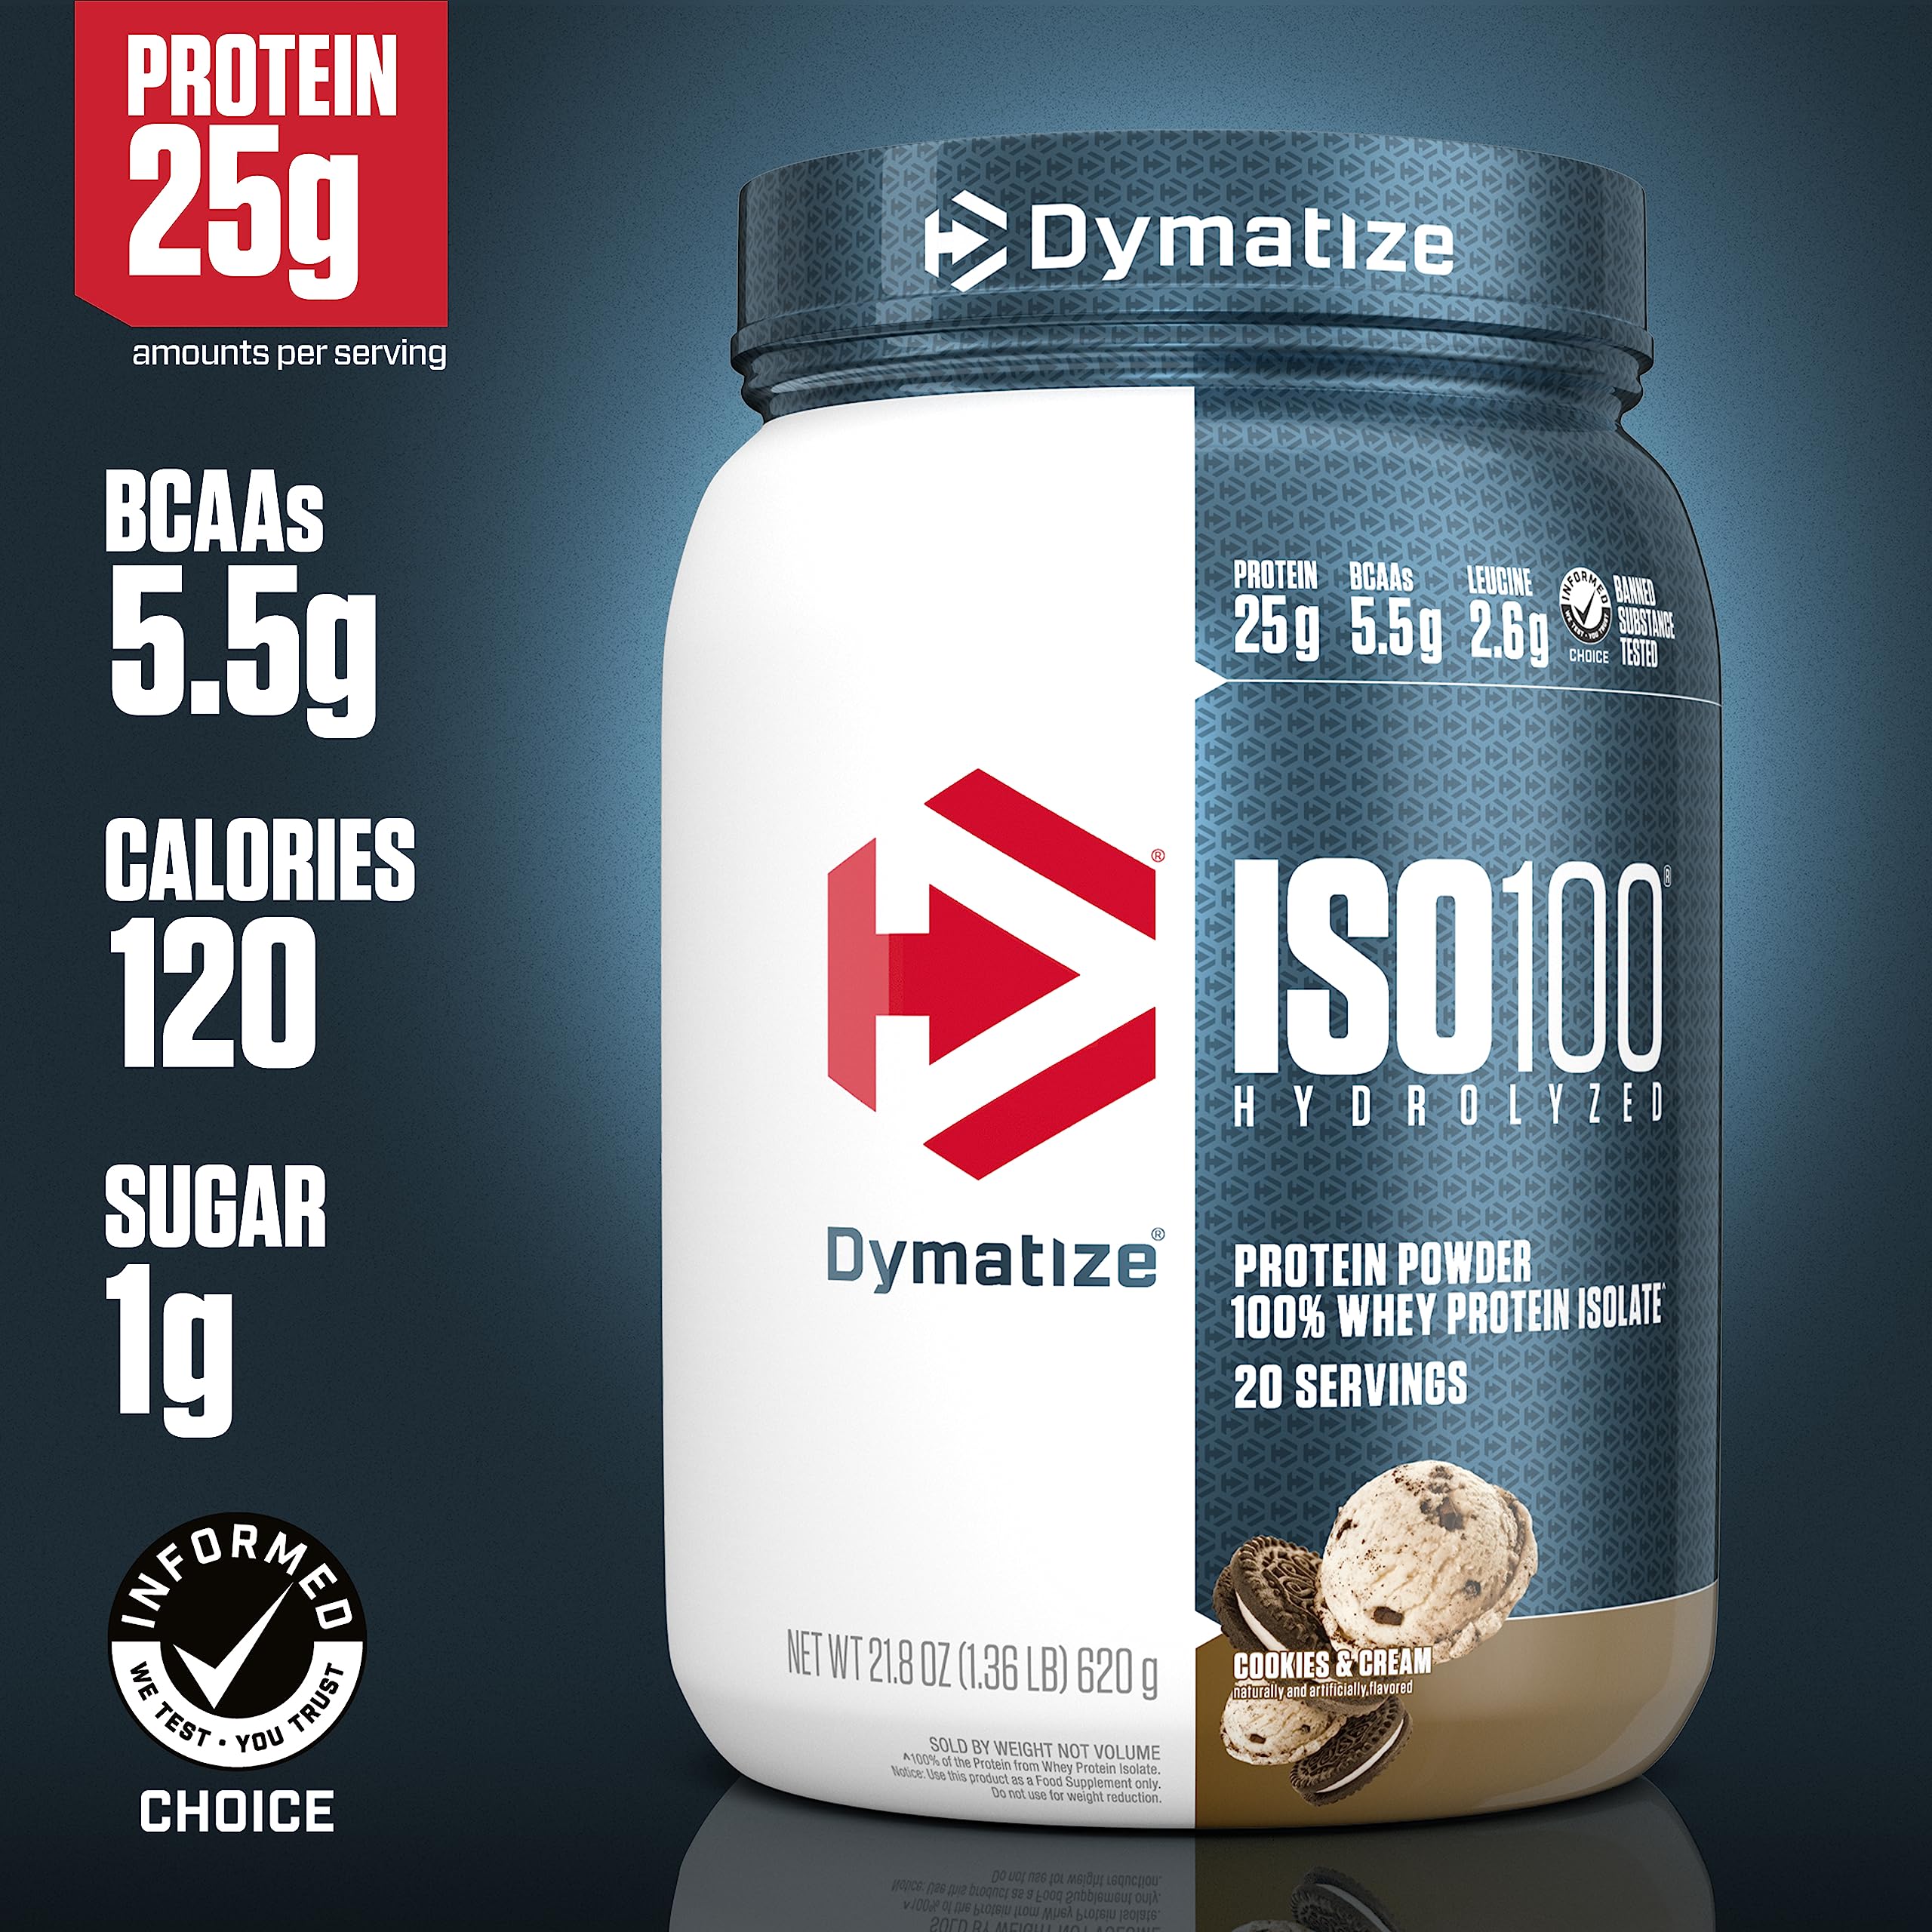 Dymatize ISO100 Hydrolyzed Protein Powder, 100% Whey Isolate Protein, 25g of Protein, 5.5g BCAAs, Gluten Free, Fast Absorbing, Easy Digesting, Cookies and Cream, 20 Servings